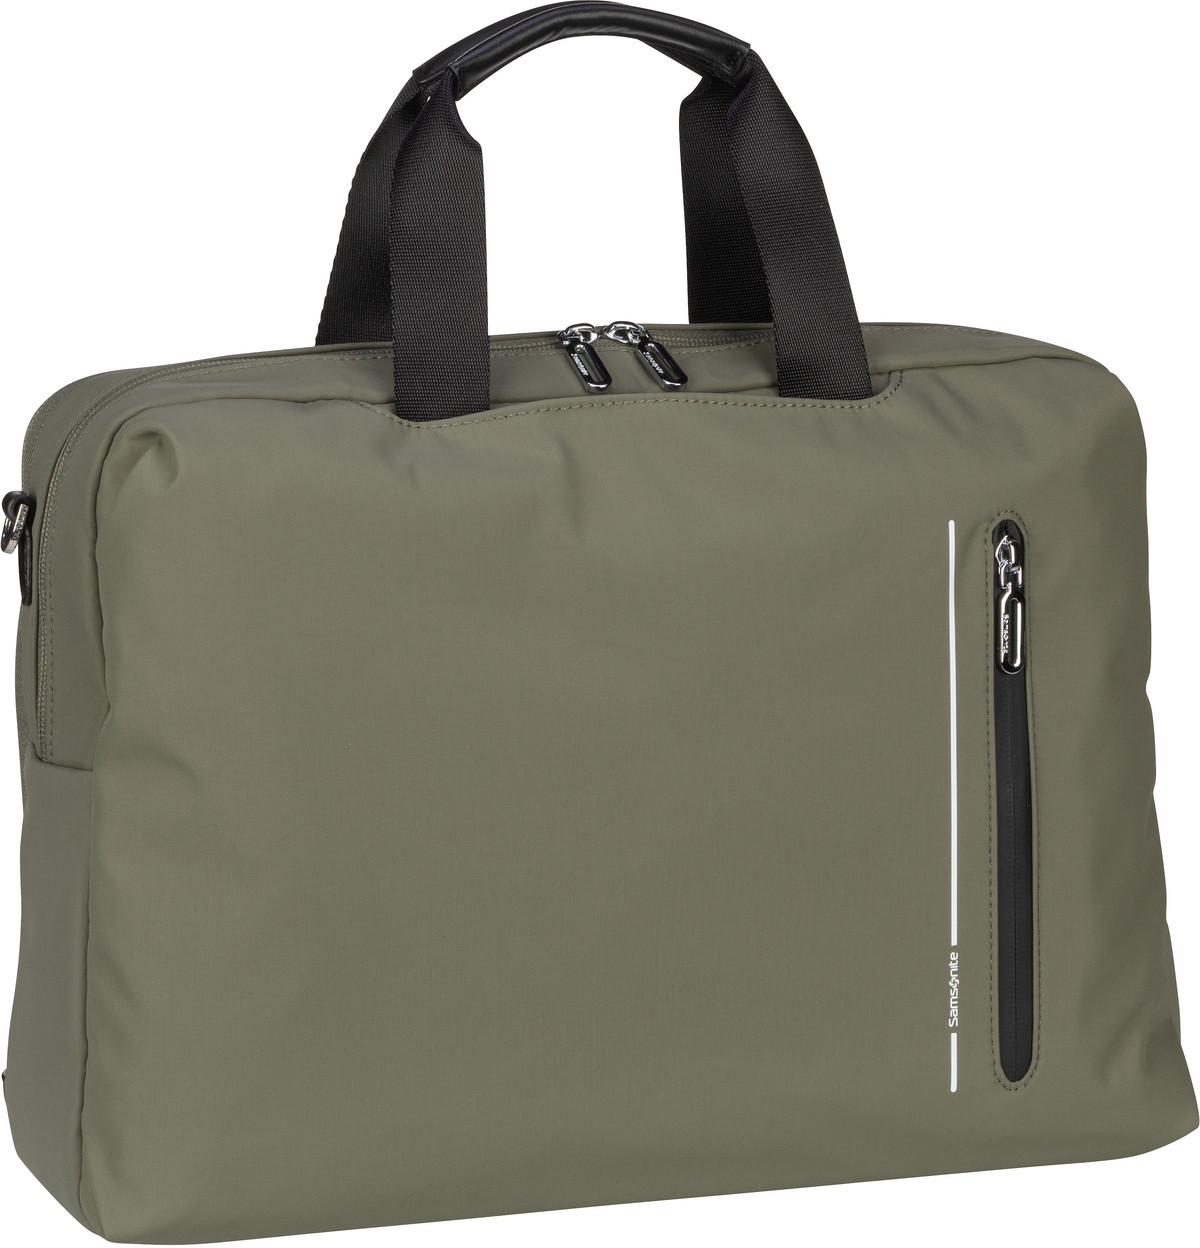 Samsonite Ongoing Bailhandle 15.6'' 2 Comp - Olive Green